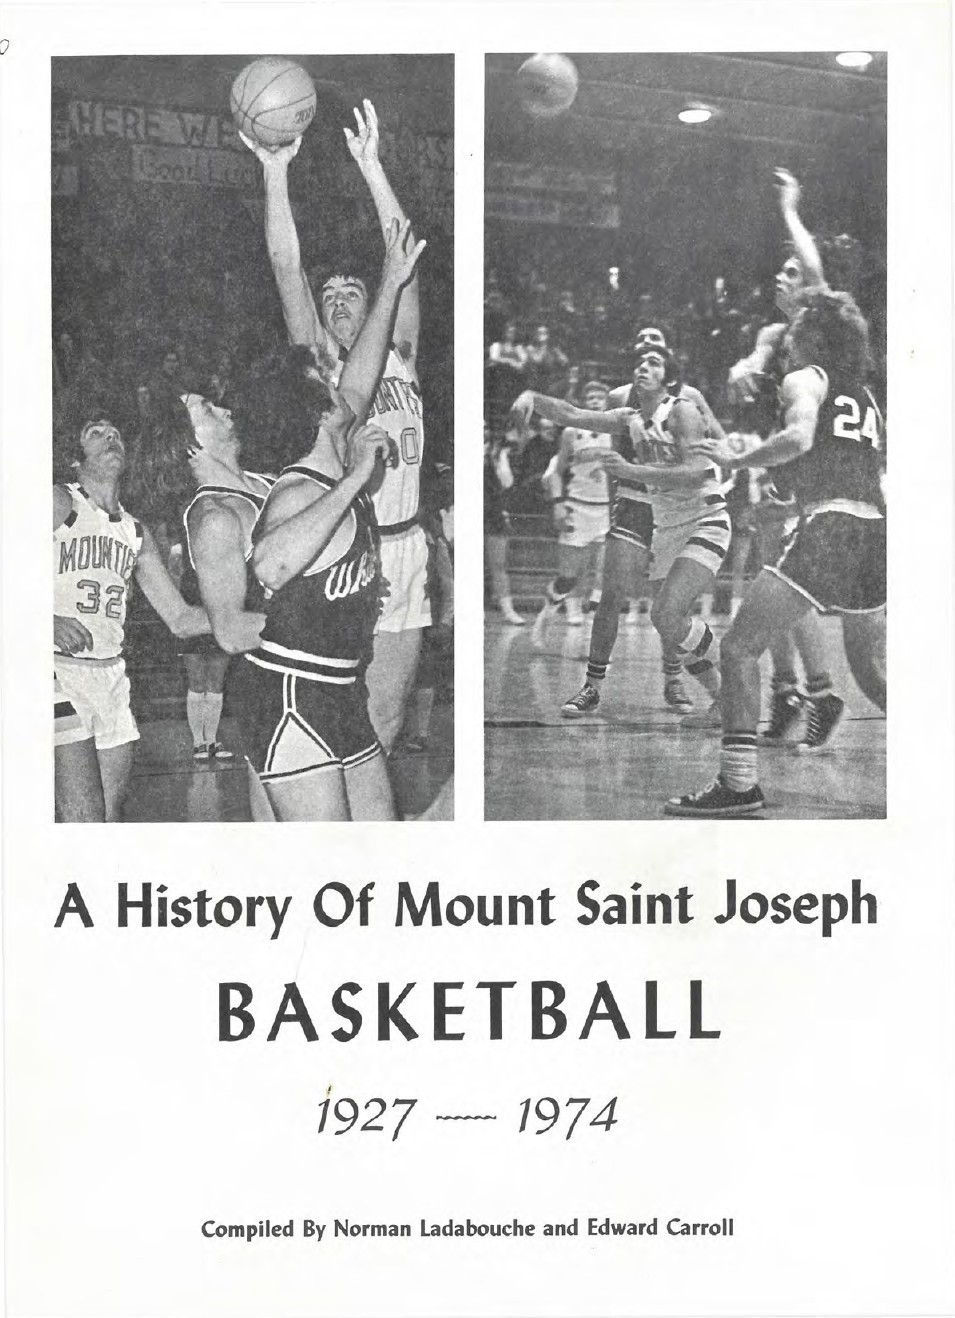 Basketball players featured in a history book cover